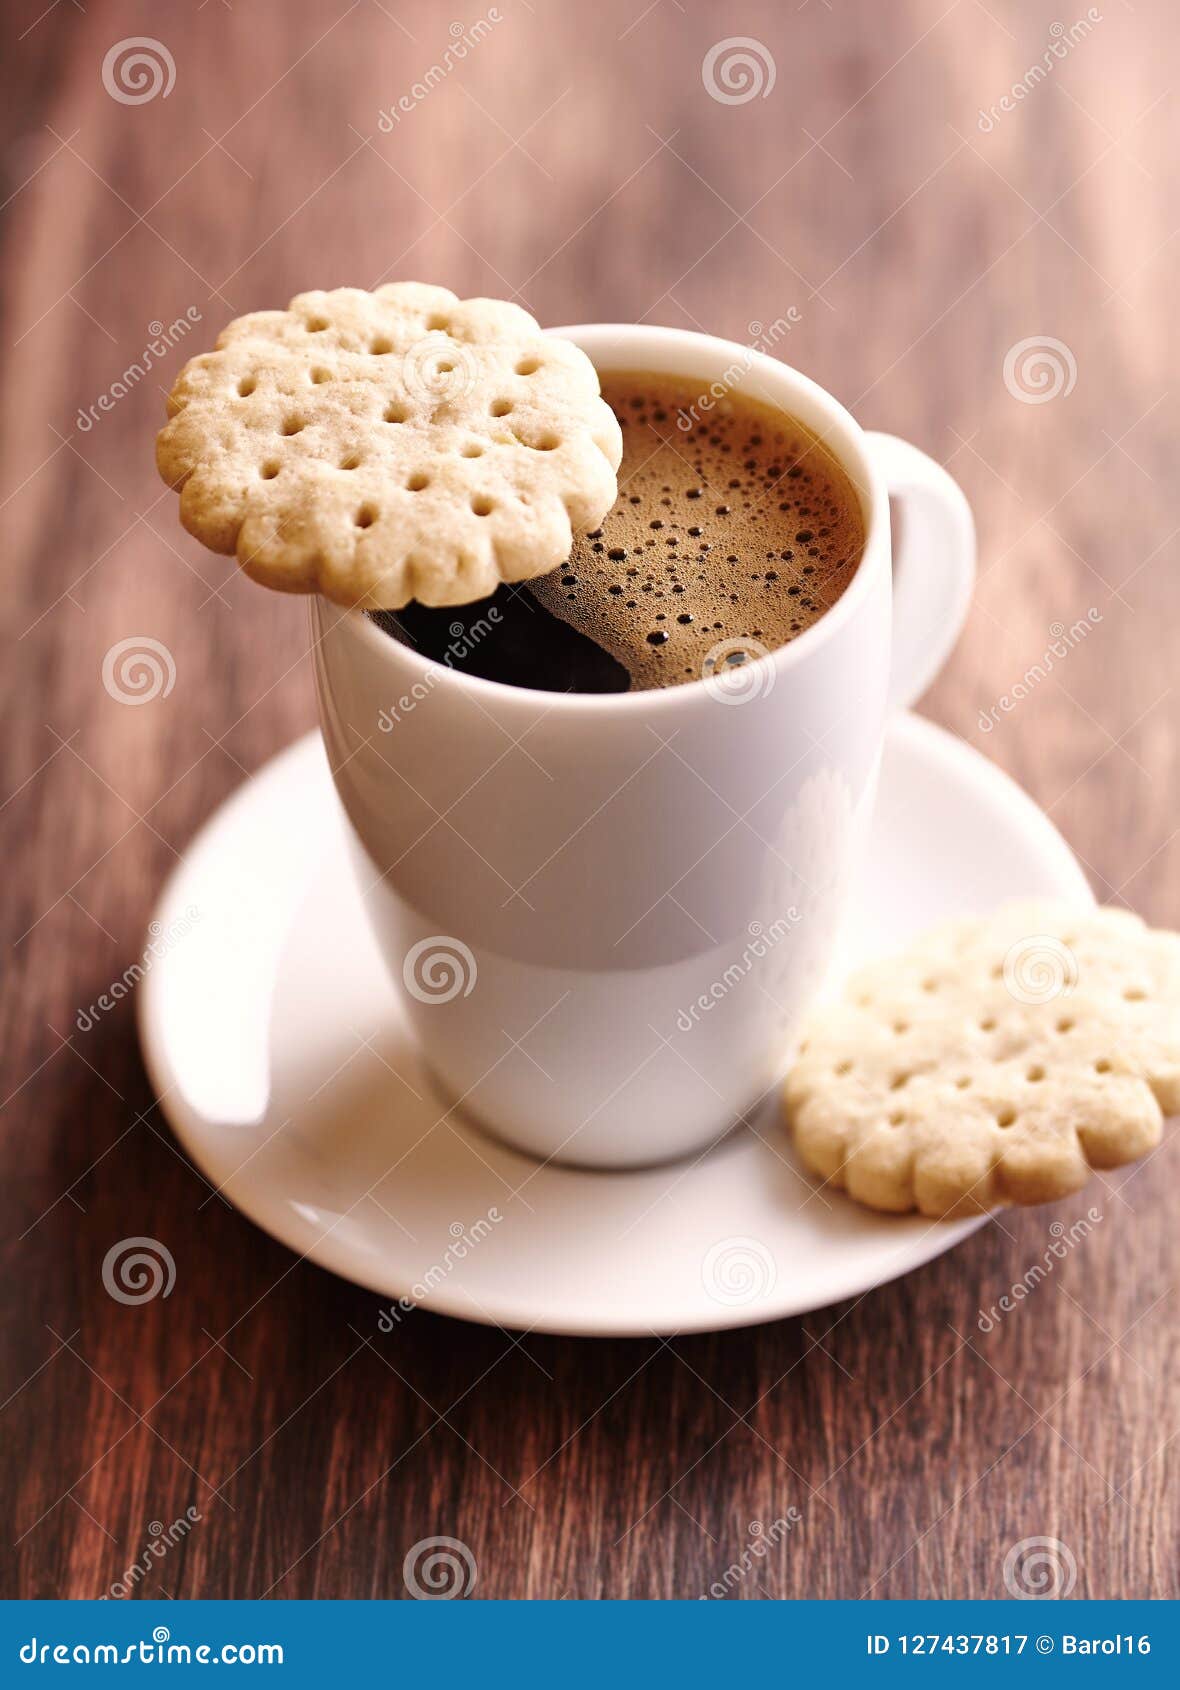 Cup of Coffee and Butter Biscuits. Stock Image - Image of closeup ...